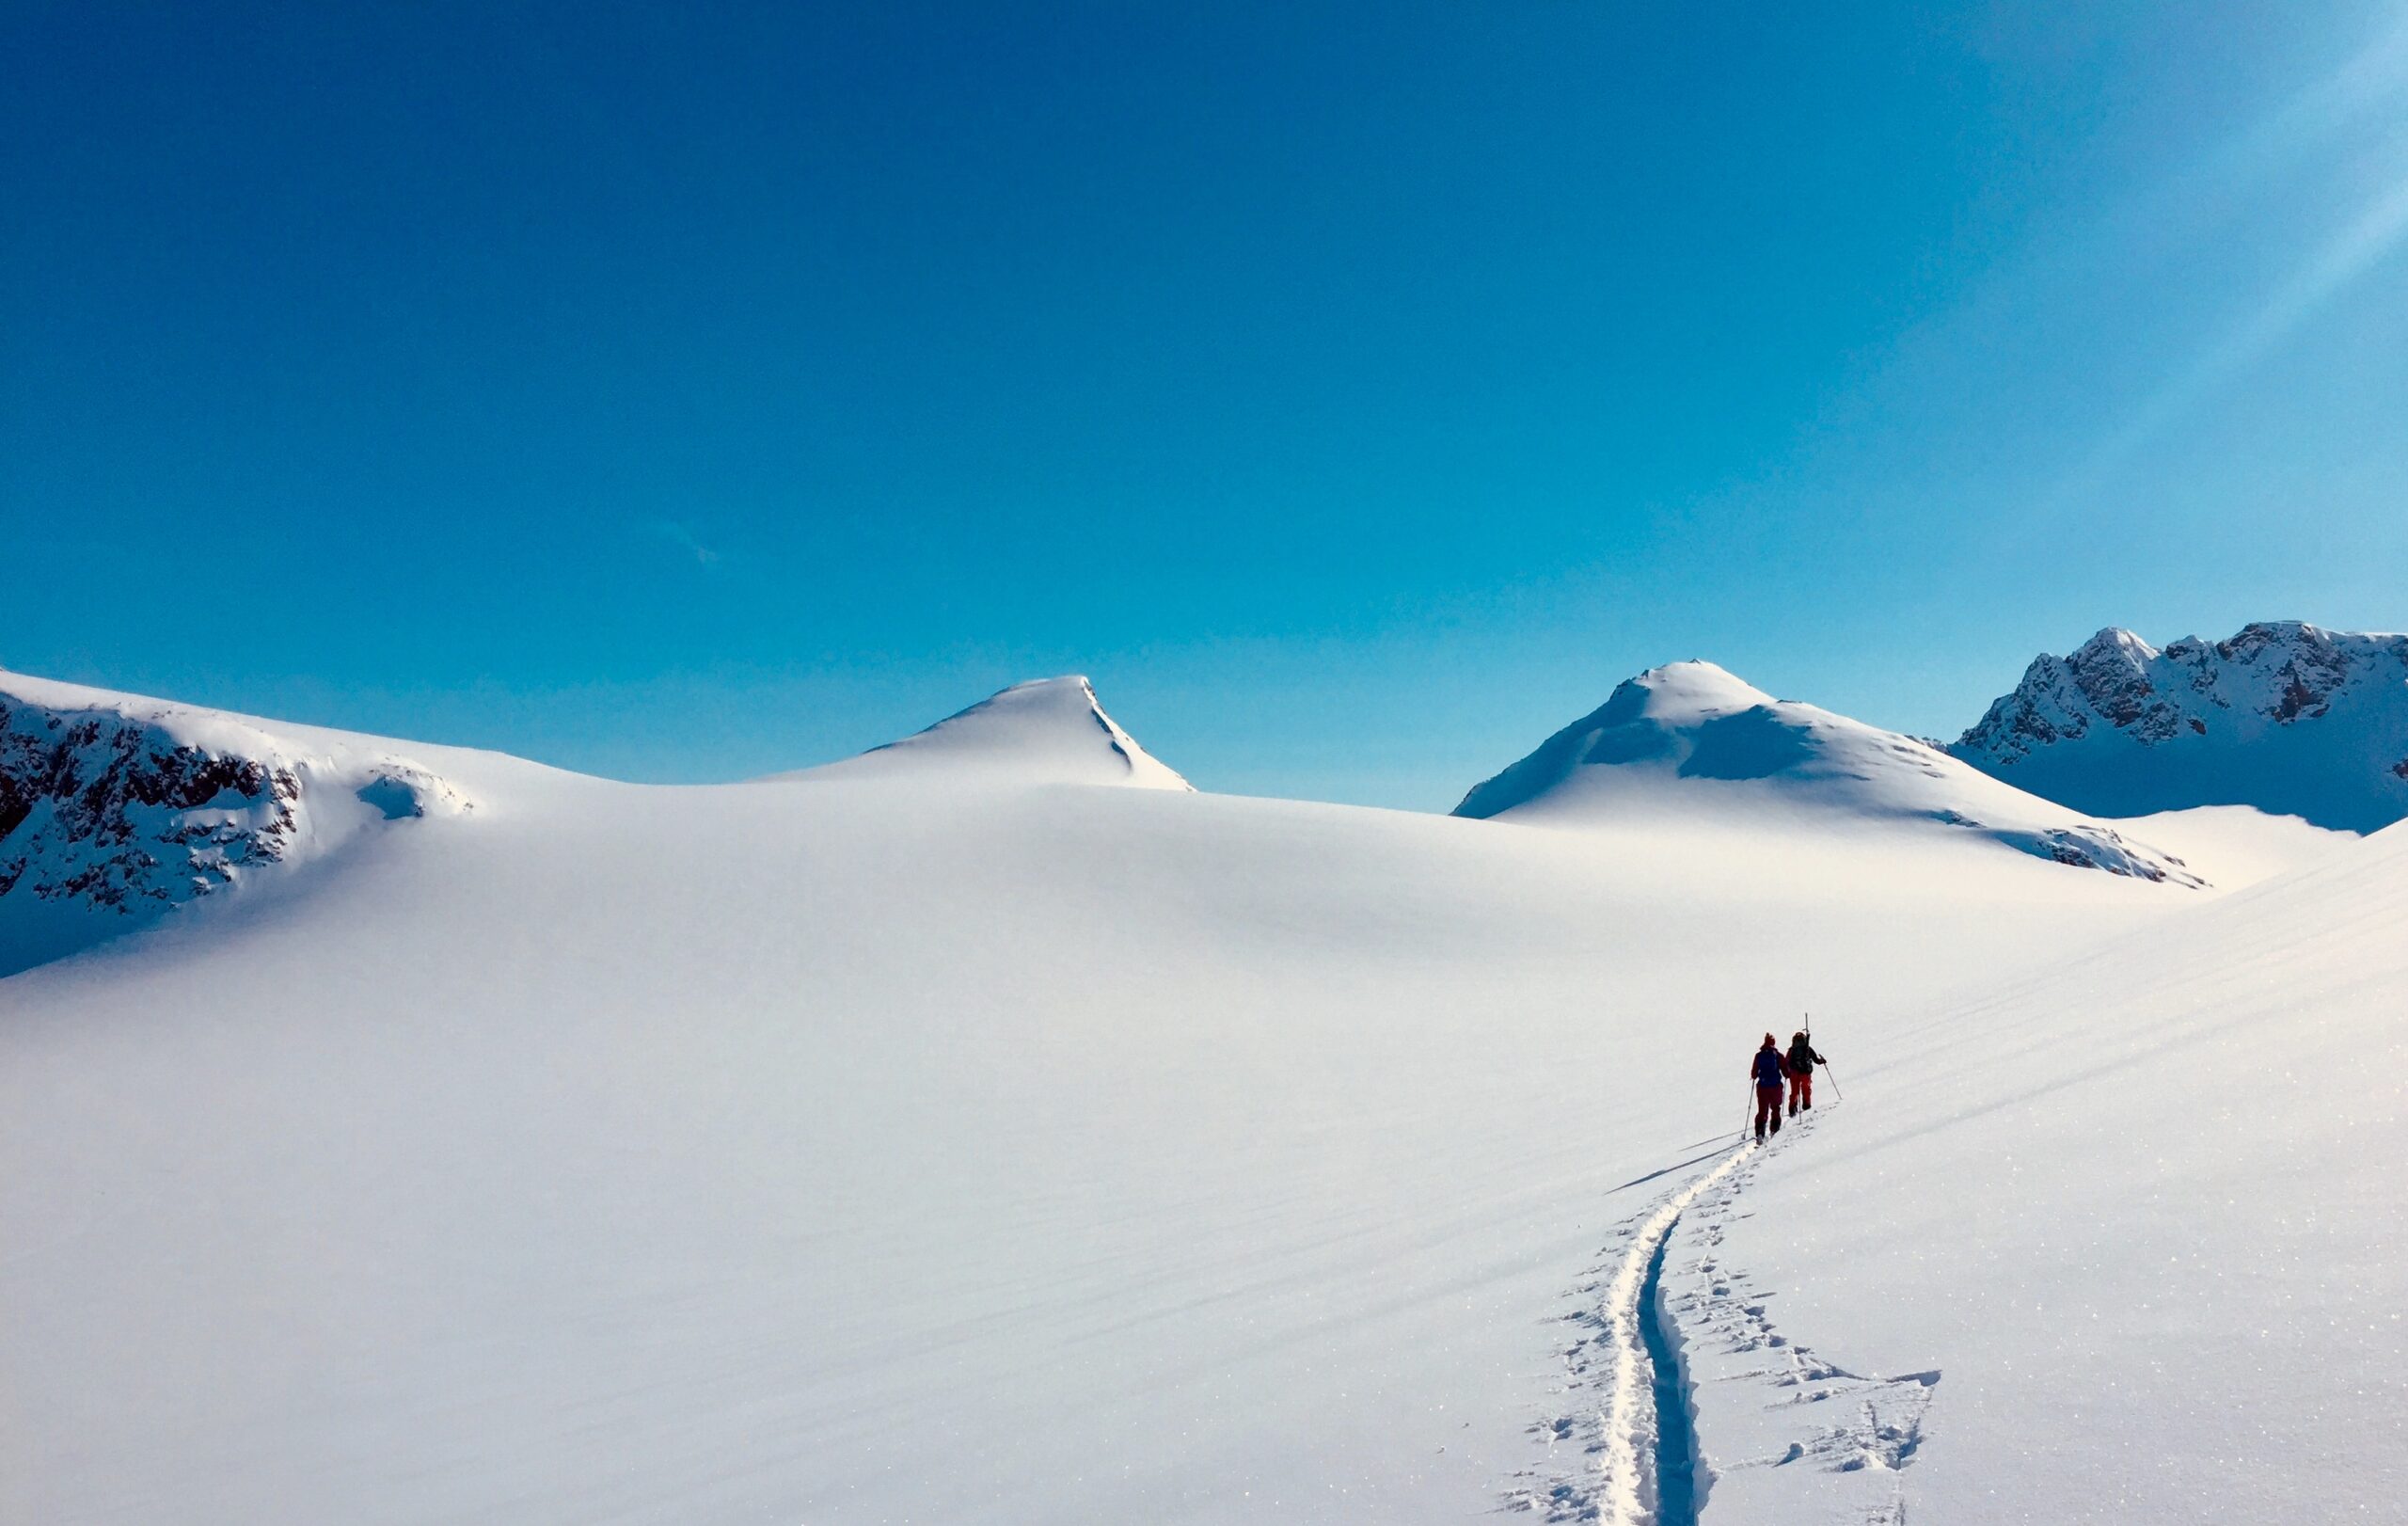 Snow shoeing and skiing on Mitivagkat glacier. Photo by The Red House